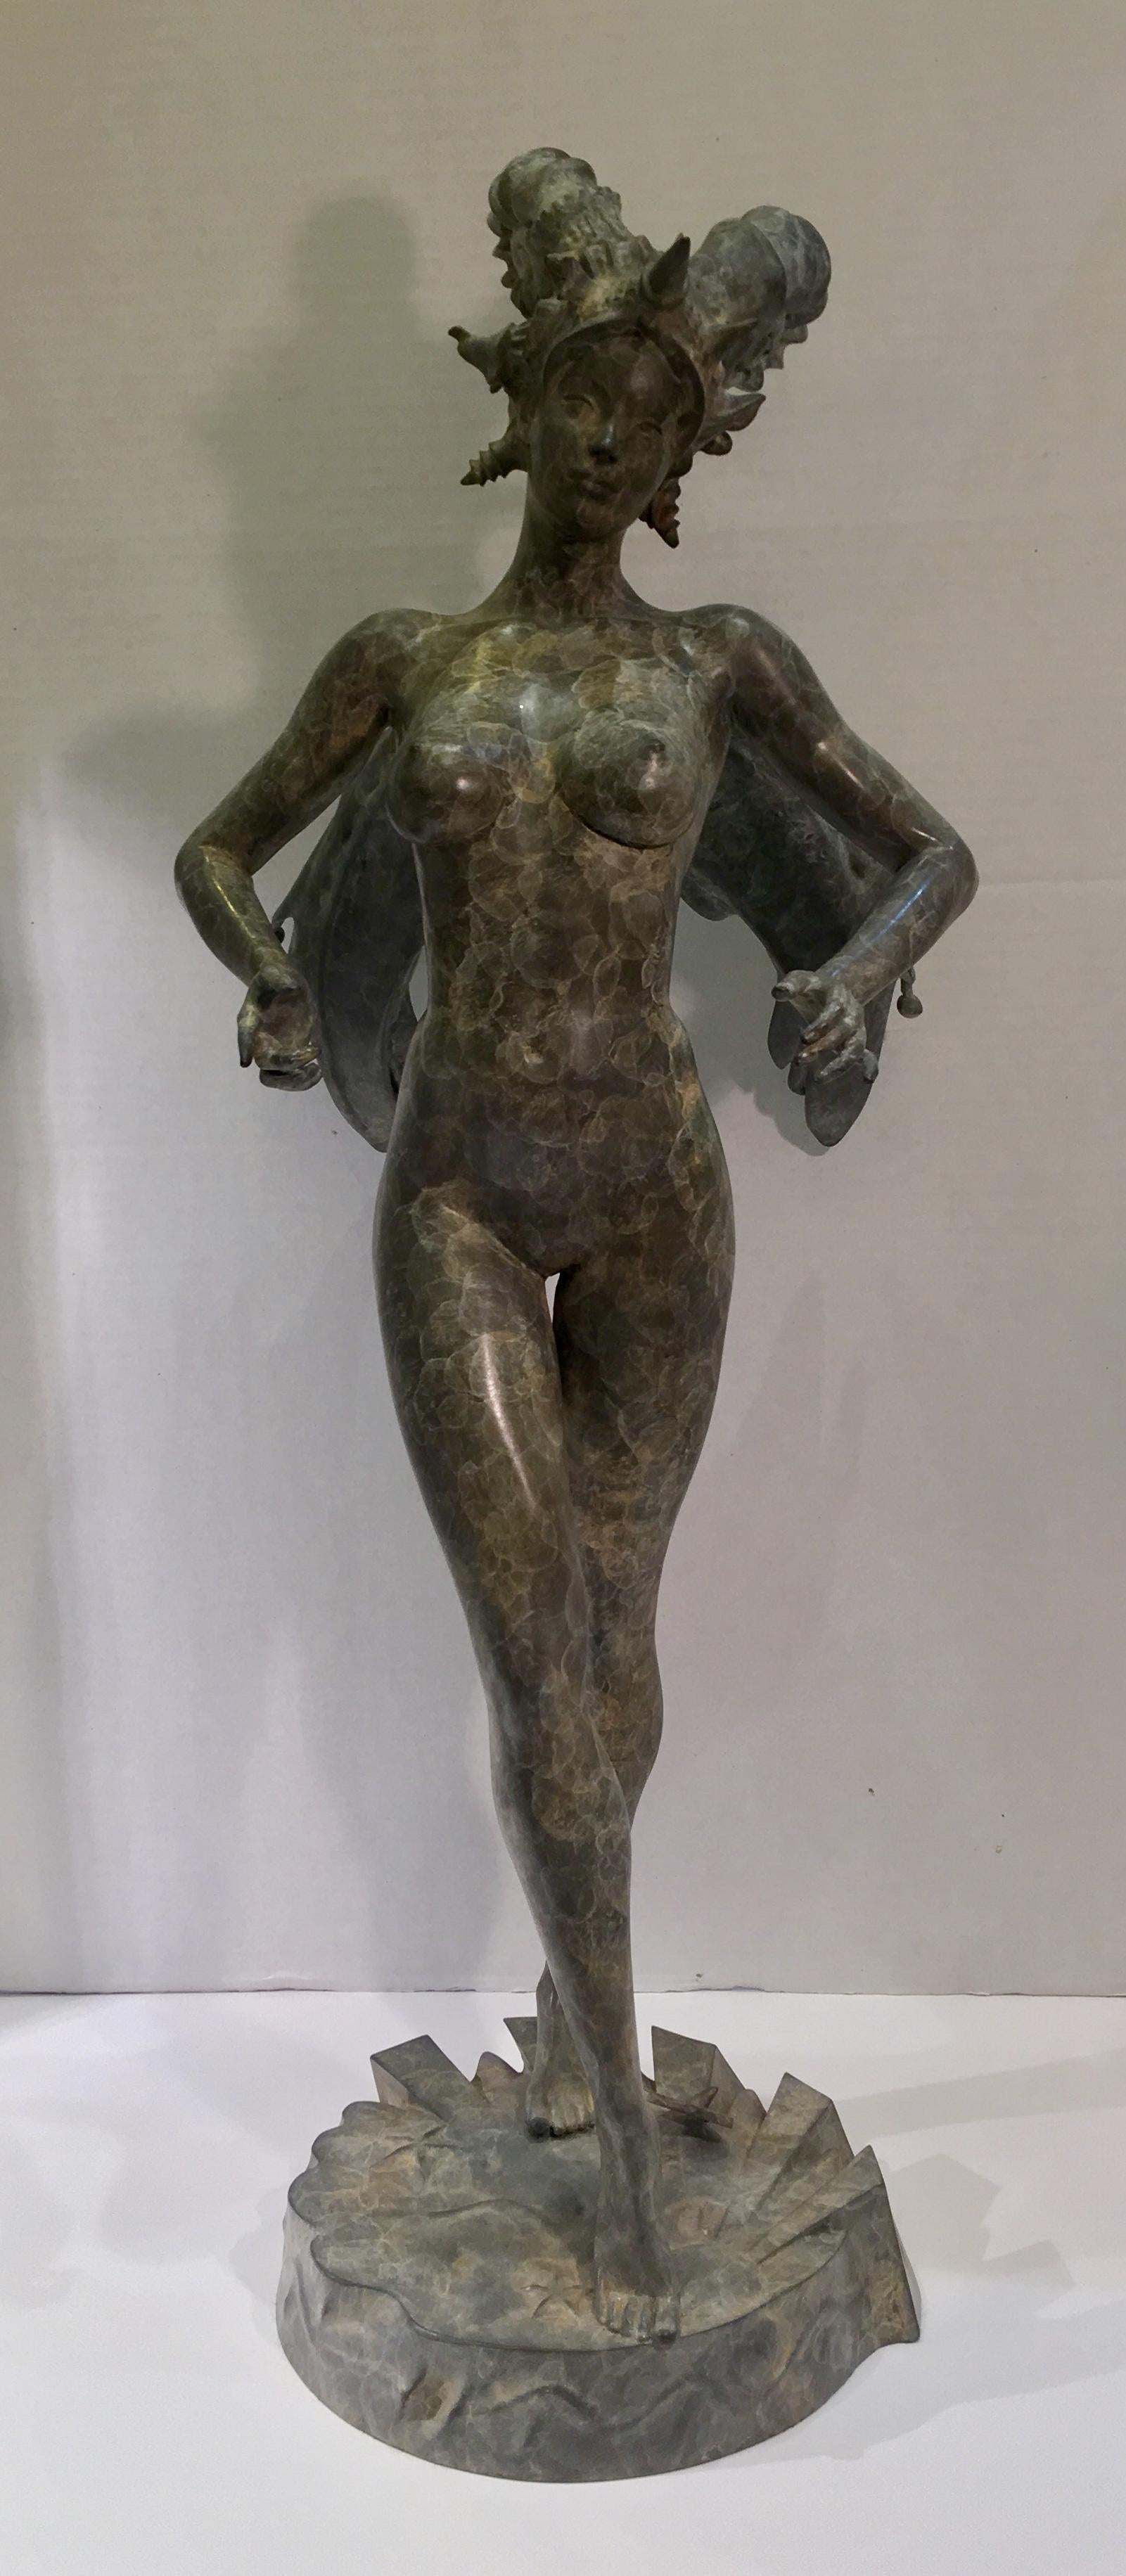 Dramatic, cast bronze sculpture of a standing, winged, statuesque nude woman with ram horns. Bronze has a very artistic marbleized patina.

